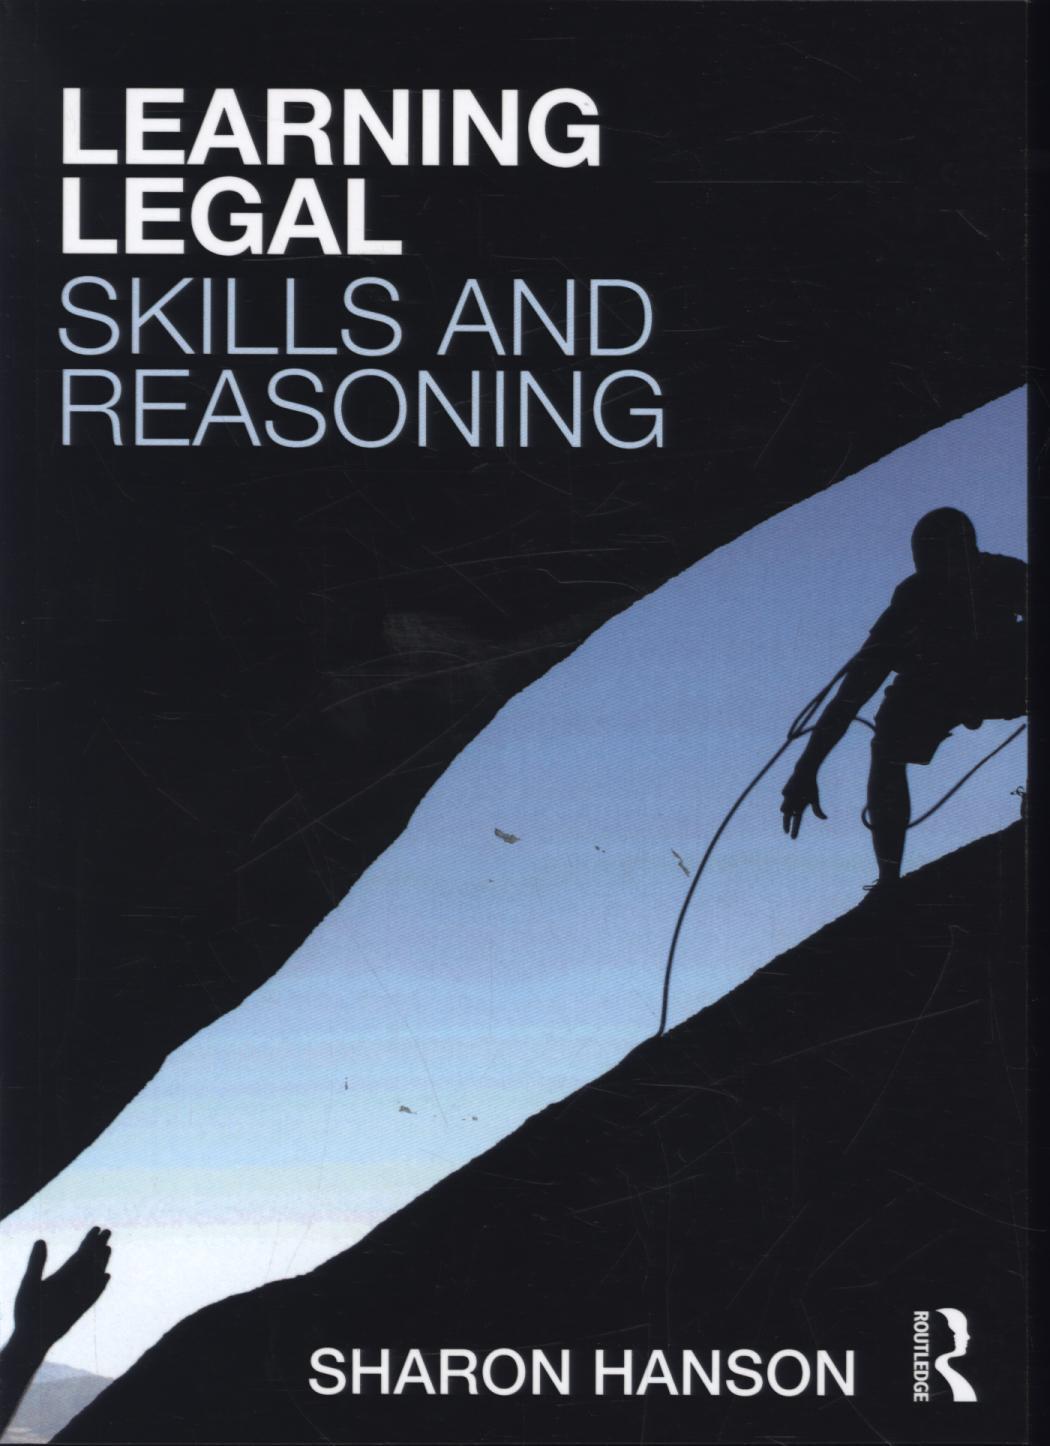 Learning Legal Skills and Reasoning